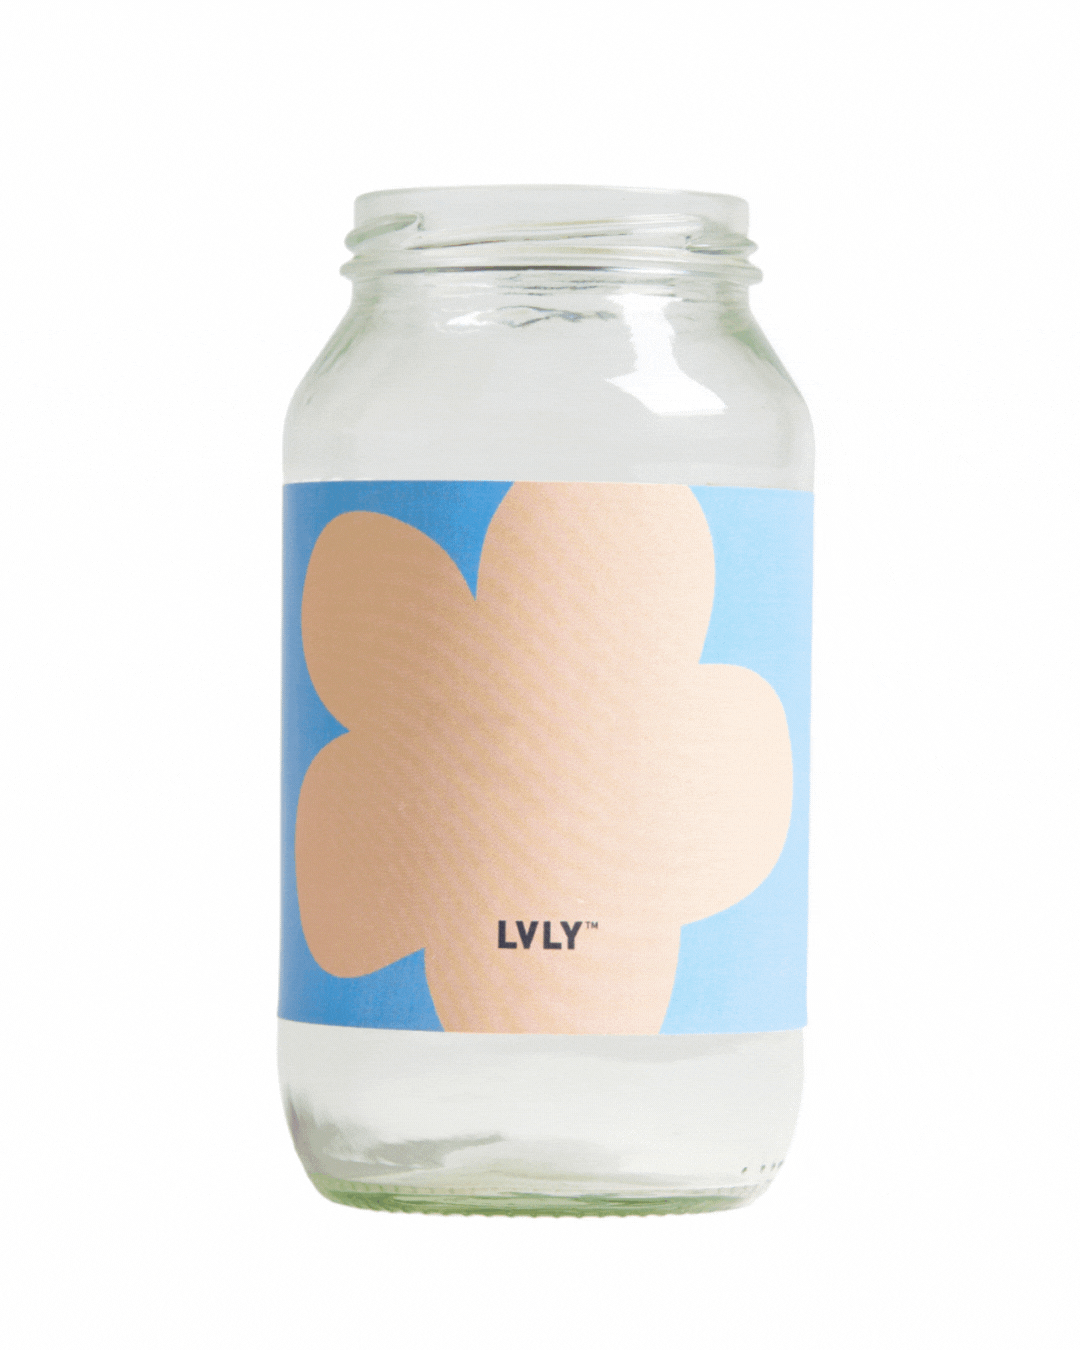 Limited Edition Personalised Jar Label